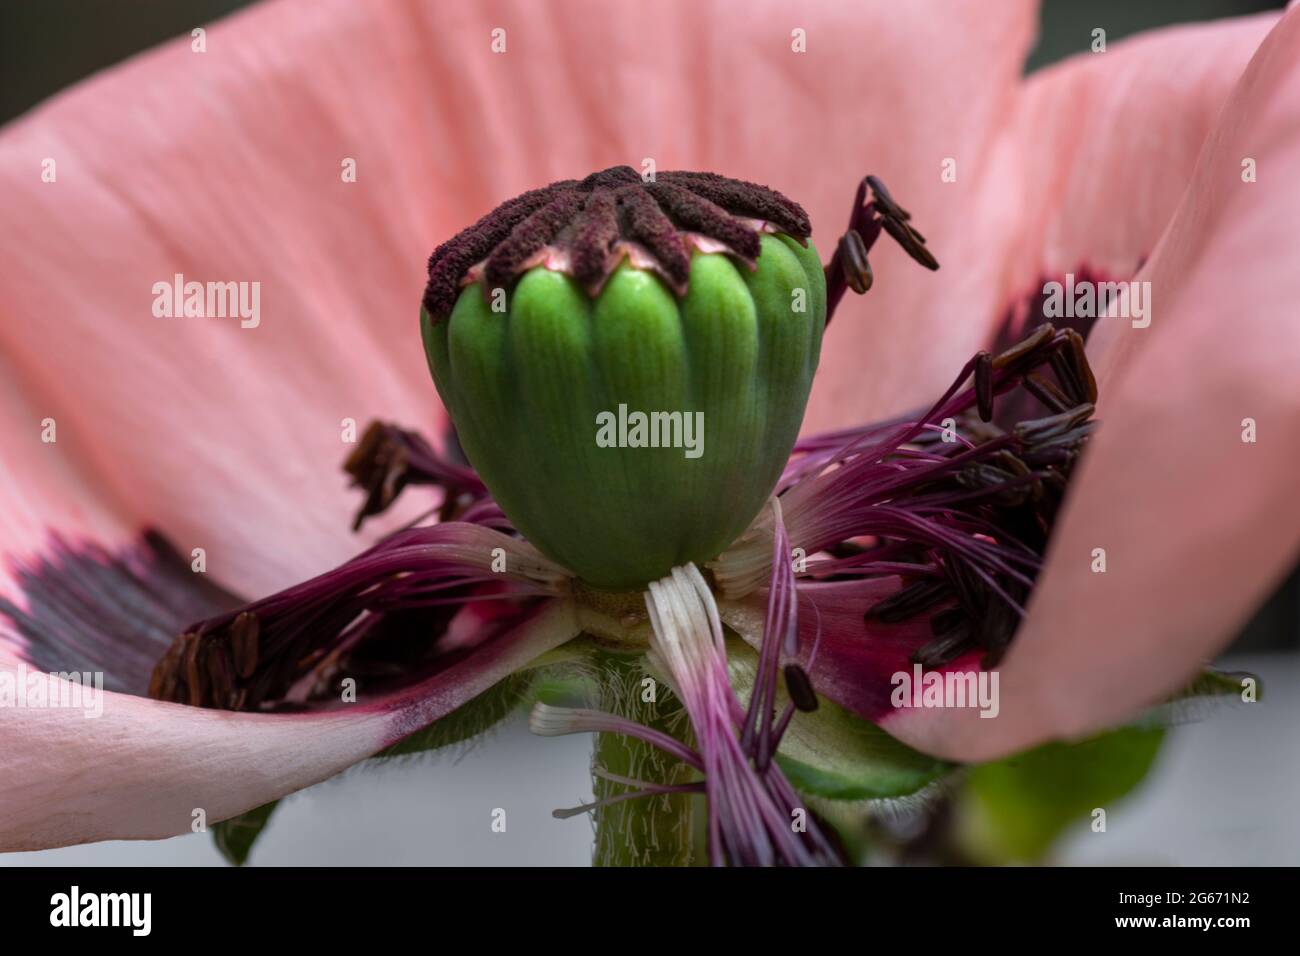 Large pink poppy seed head as it dies and drops its petals Stock Photo